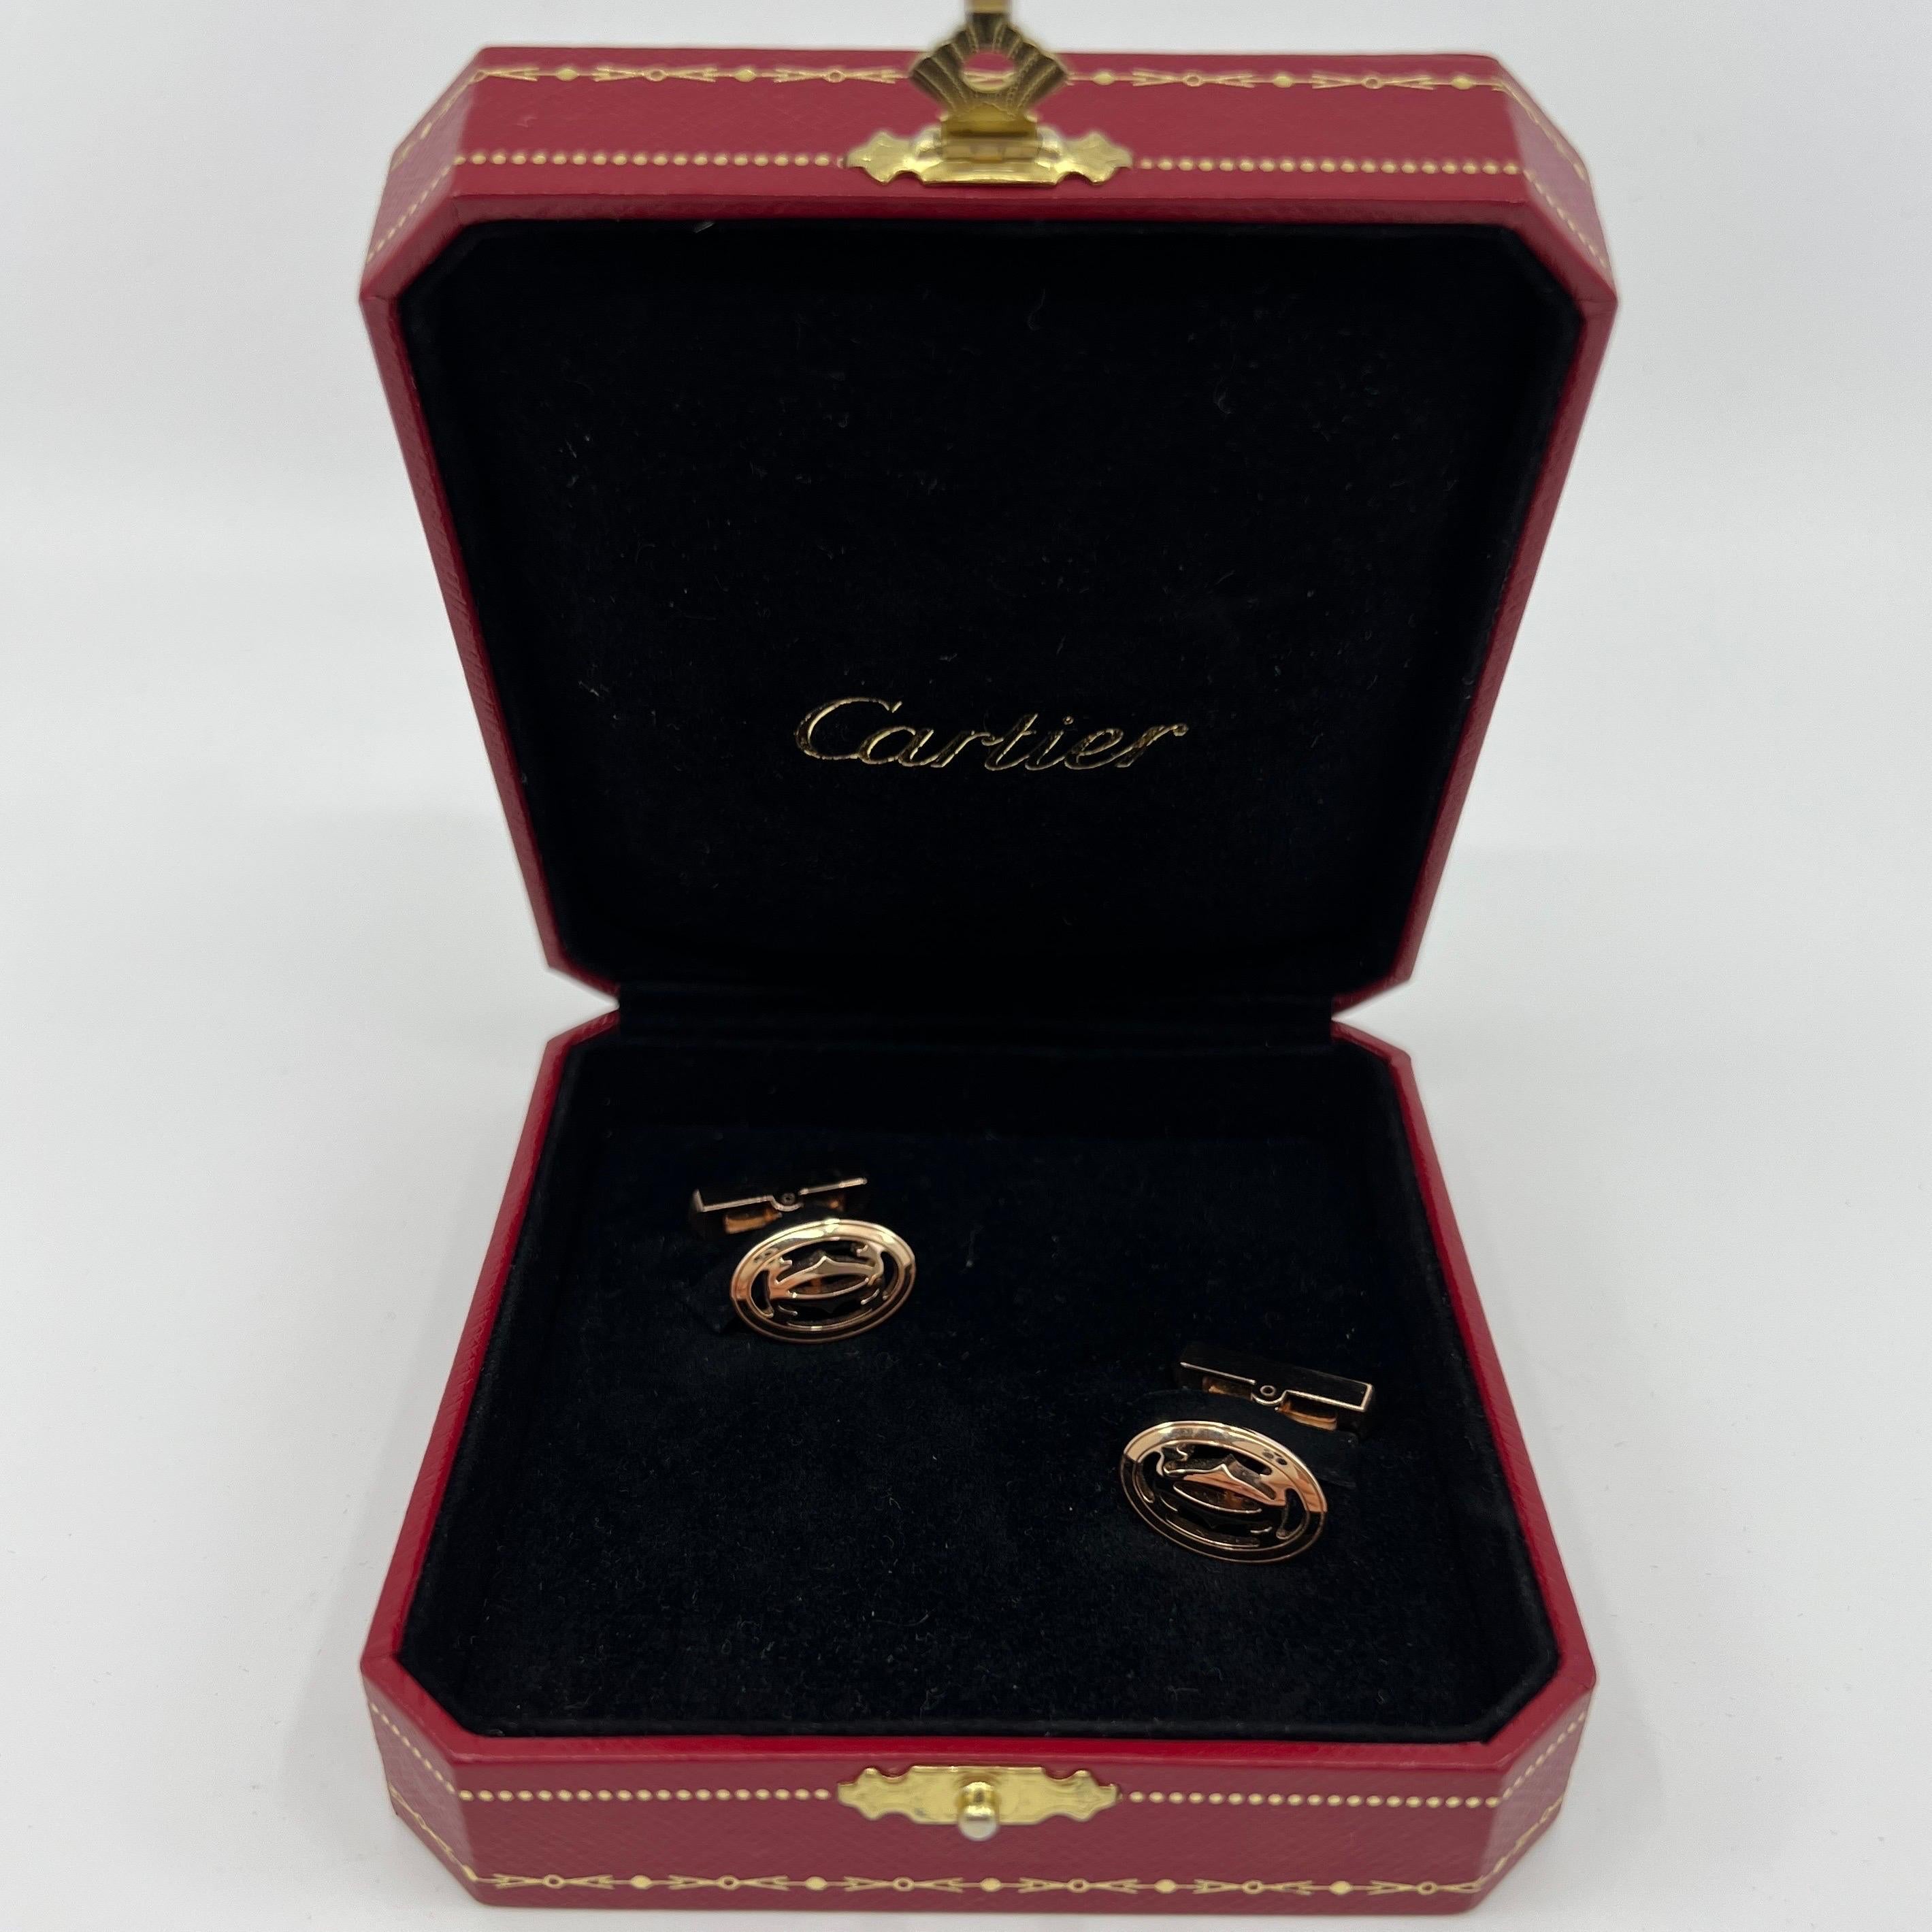 Rare Cartier Double C De Cartier 18k Rose Gold Cufflinks.

Beautiful pair of cufflinks, created in Paris by Cartier, these pieces have been crafted in solid 18k rose gold and are fitted with hinged tensions T bars.

Weight: 15.2 Grams
Head